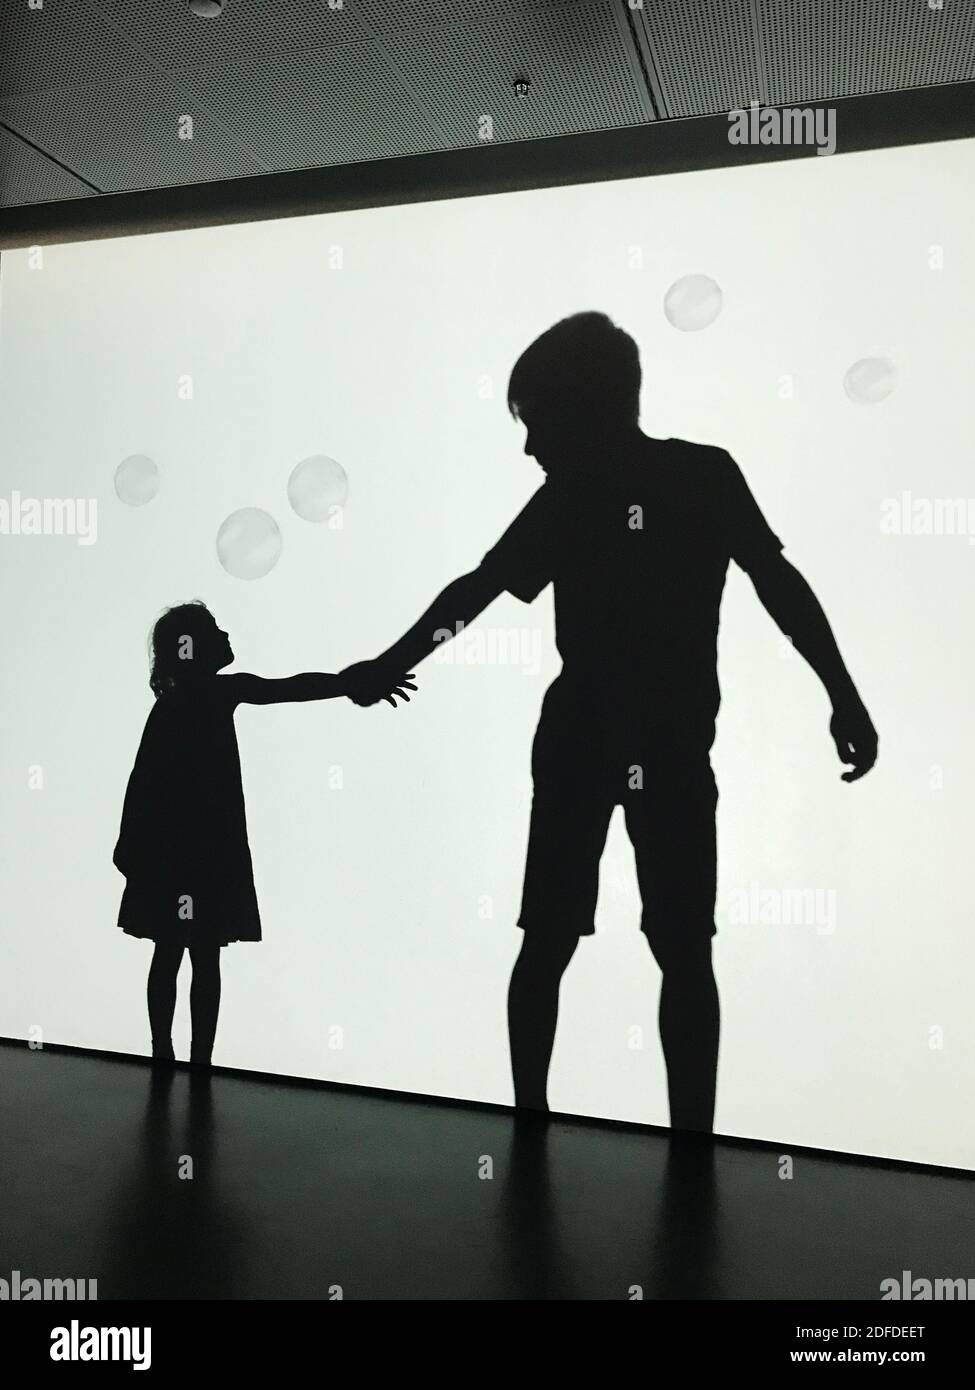 Friendship concept, silhouettes of a boy and a girl holding hands Stock Photo